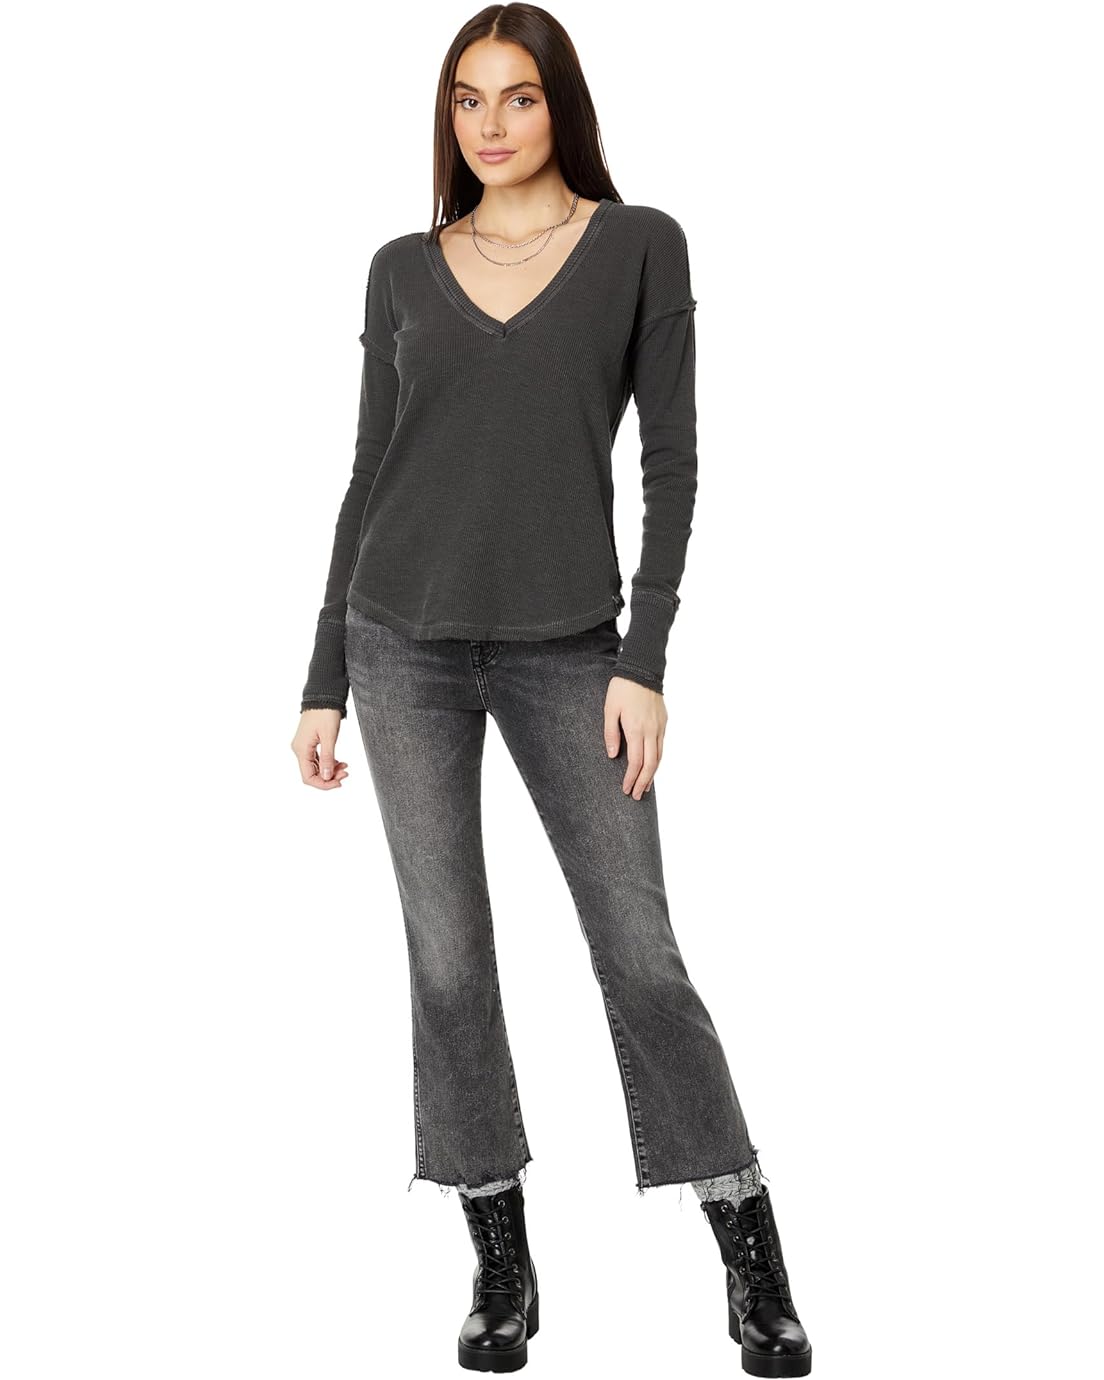  7 For All Mankind High-Waist Slim Kick with Distress Hem in Silent Night